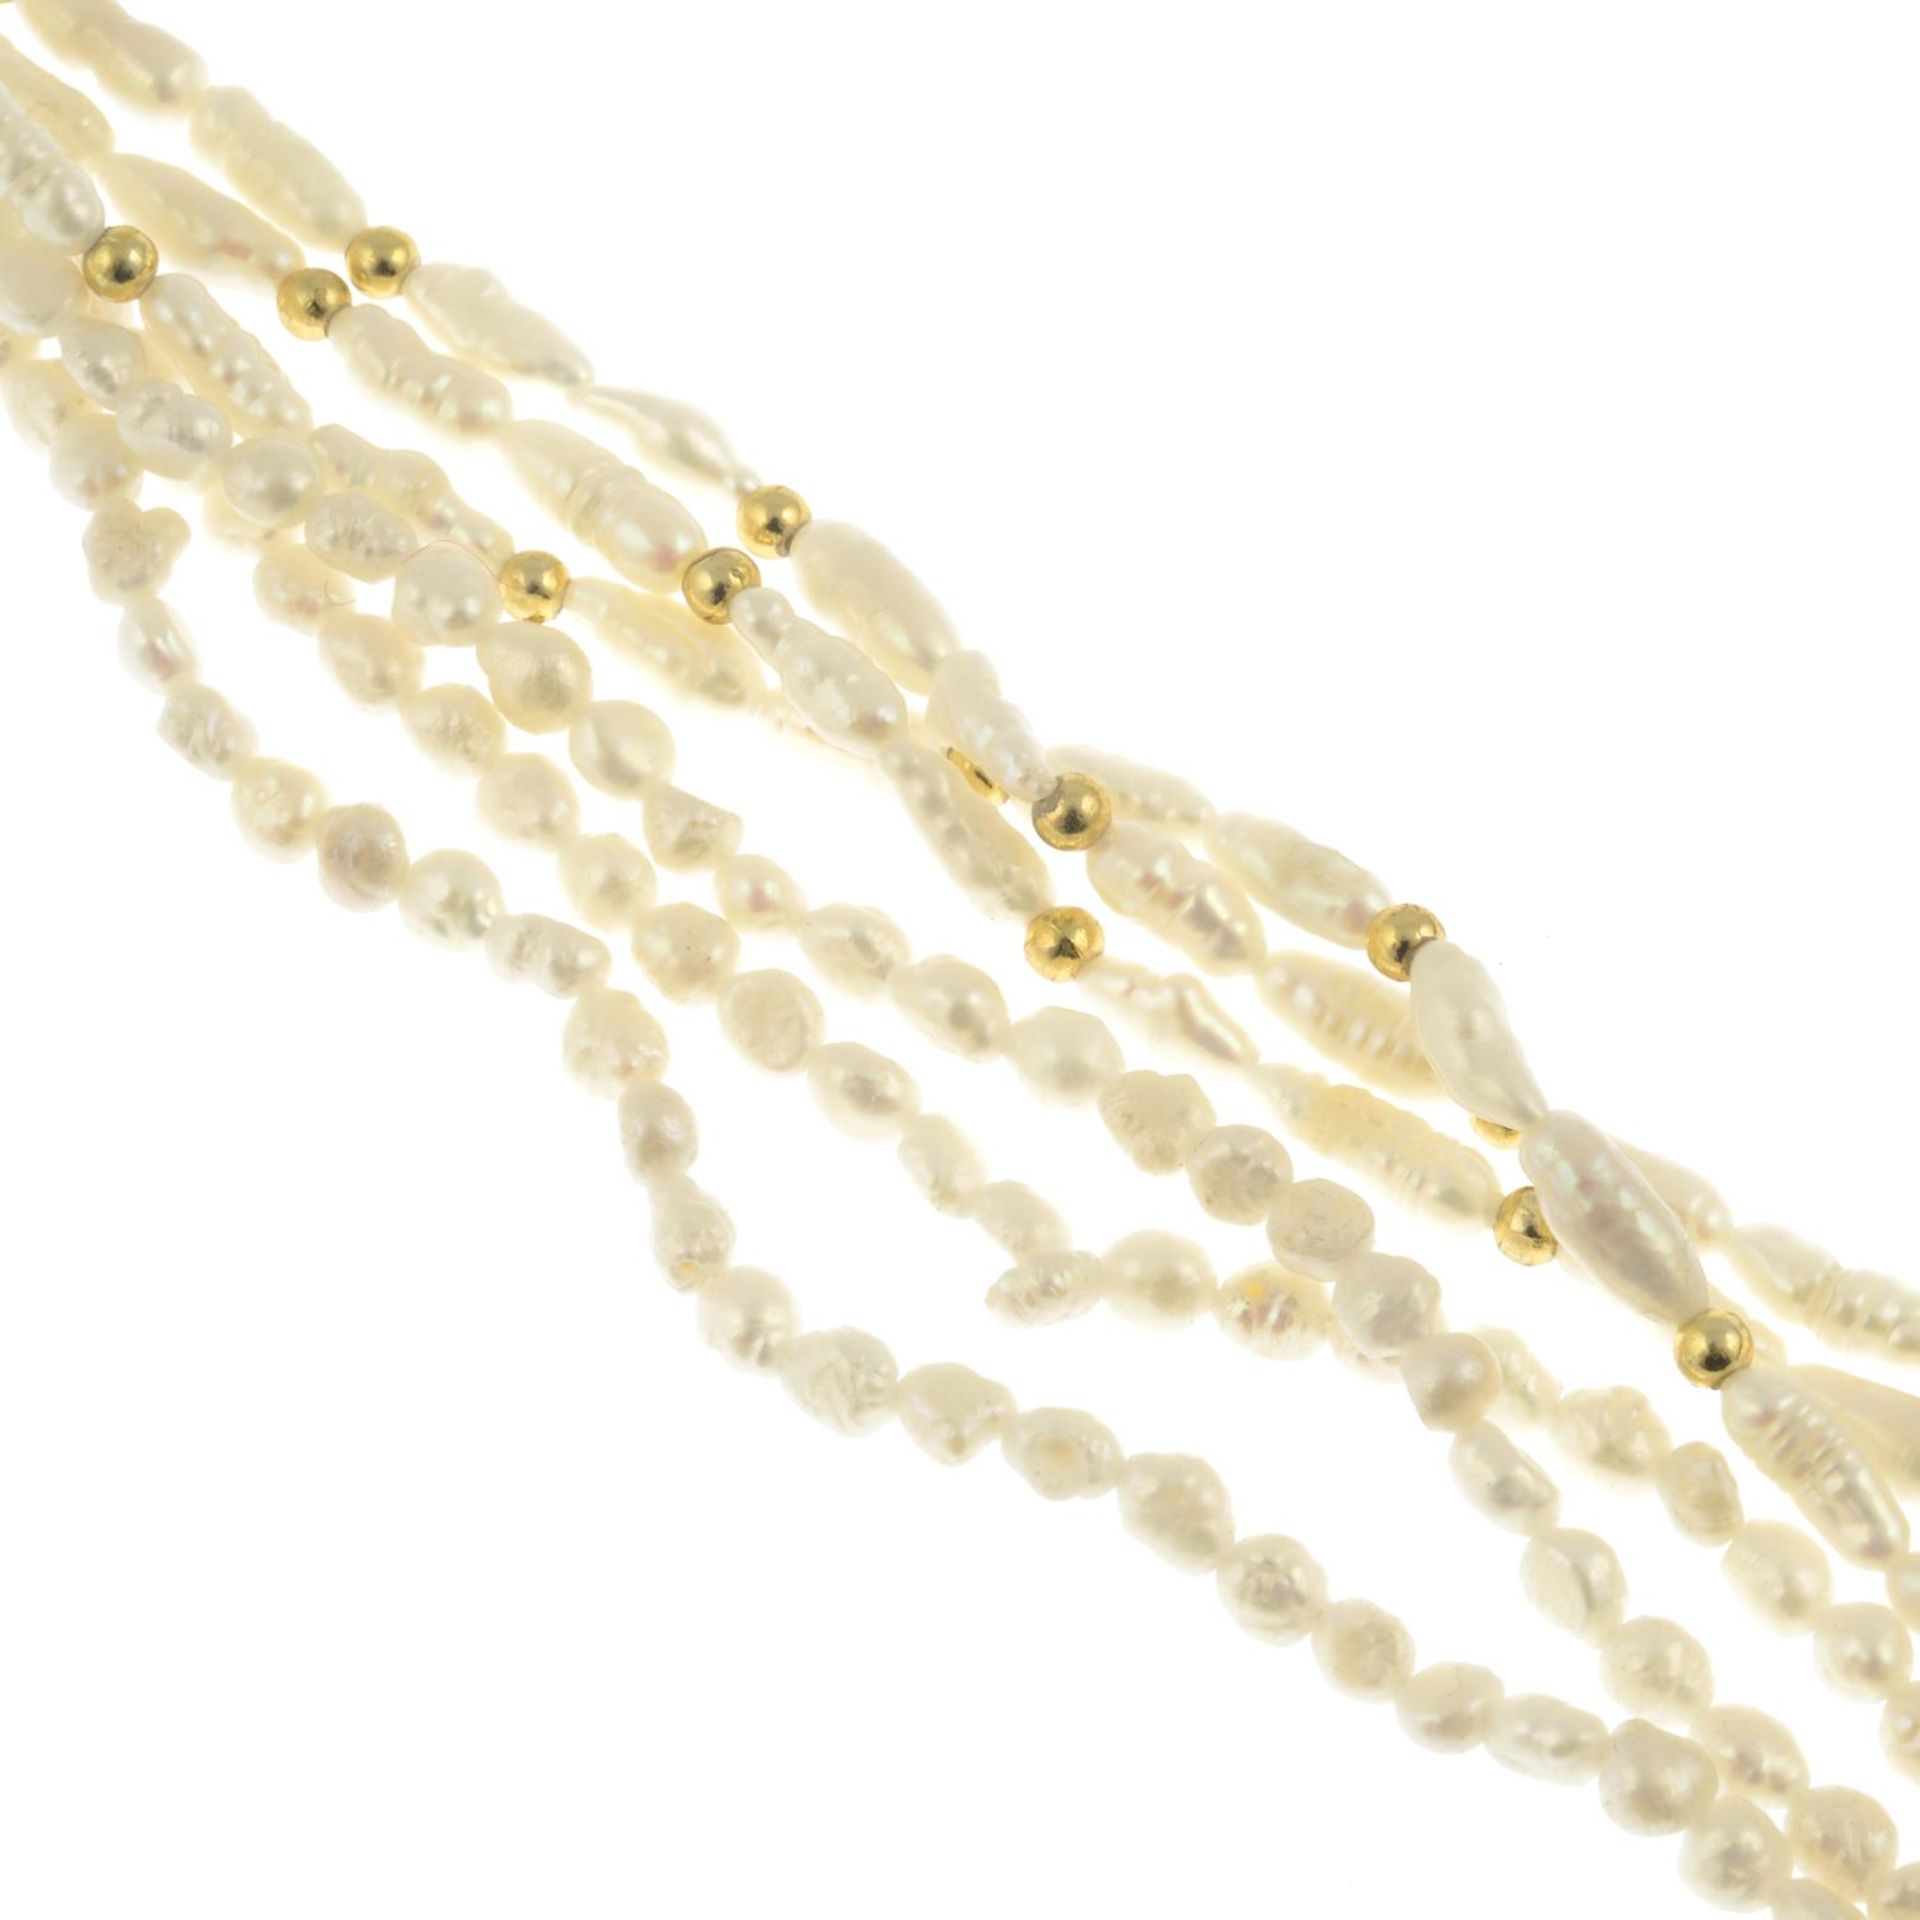 Four freshwater cultured pearl necklaces.Lengths of necklaces 42 to 60cms.